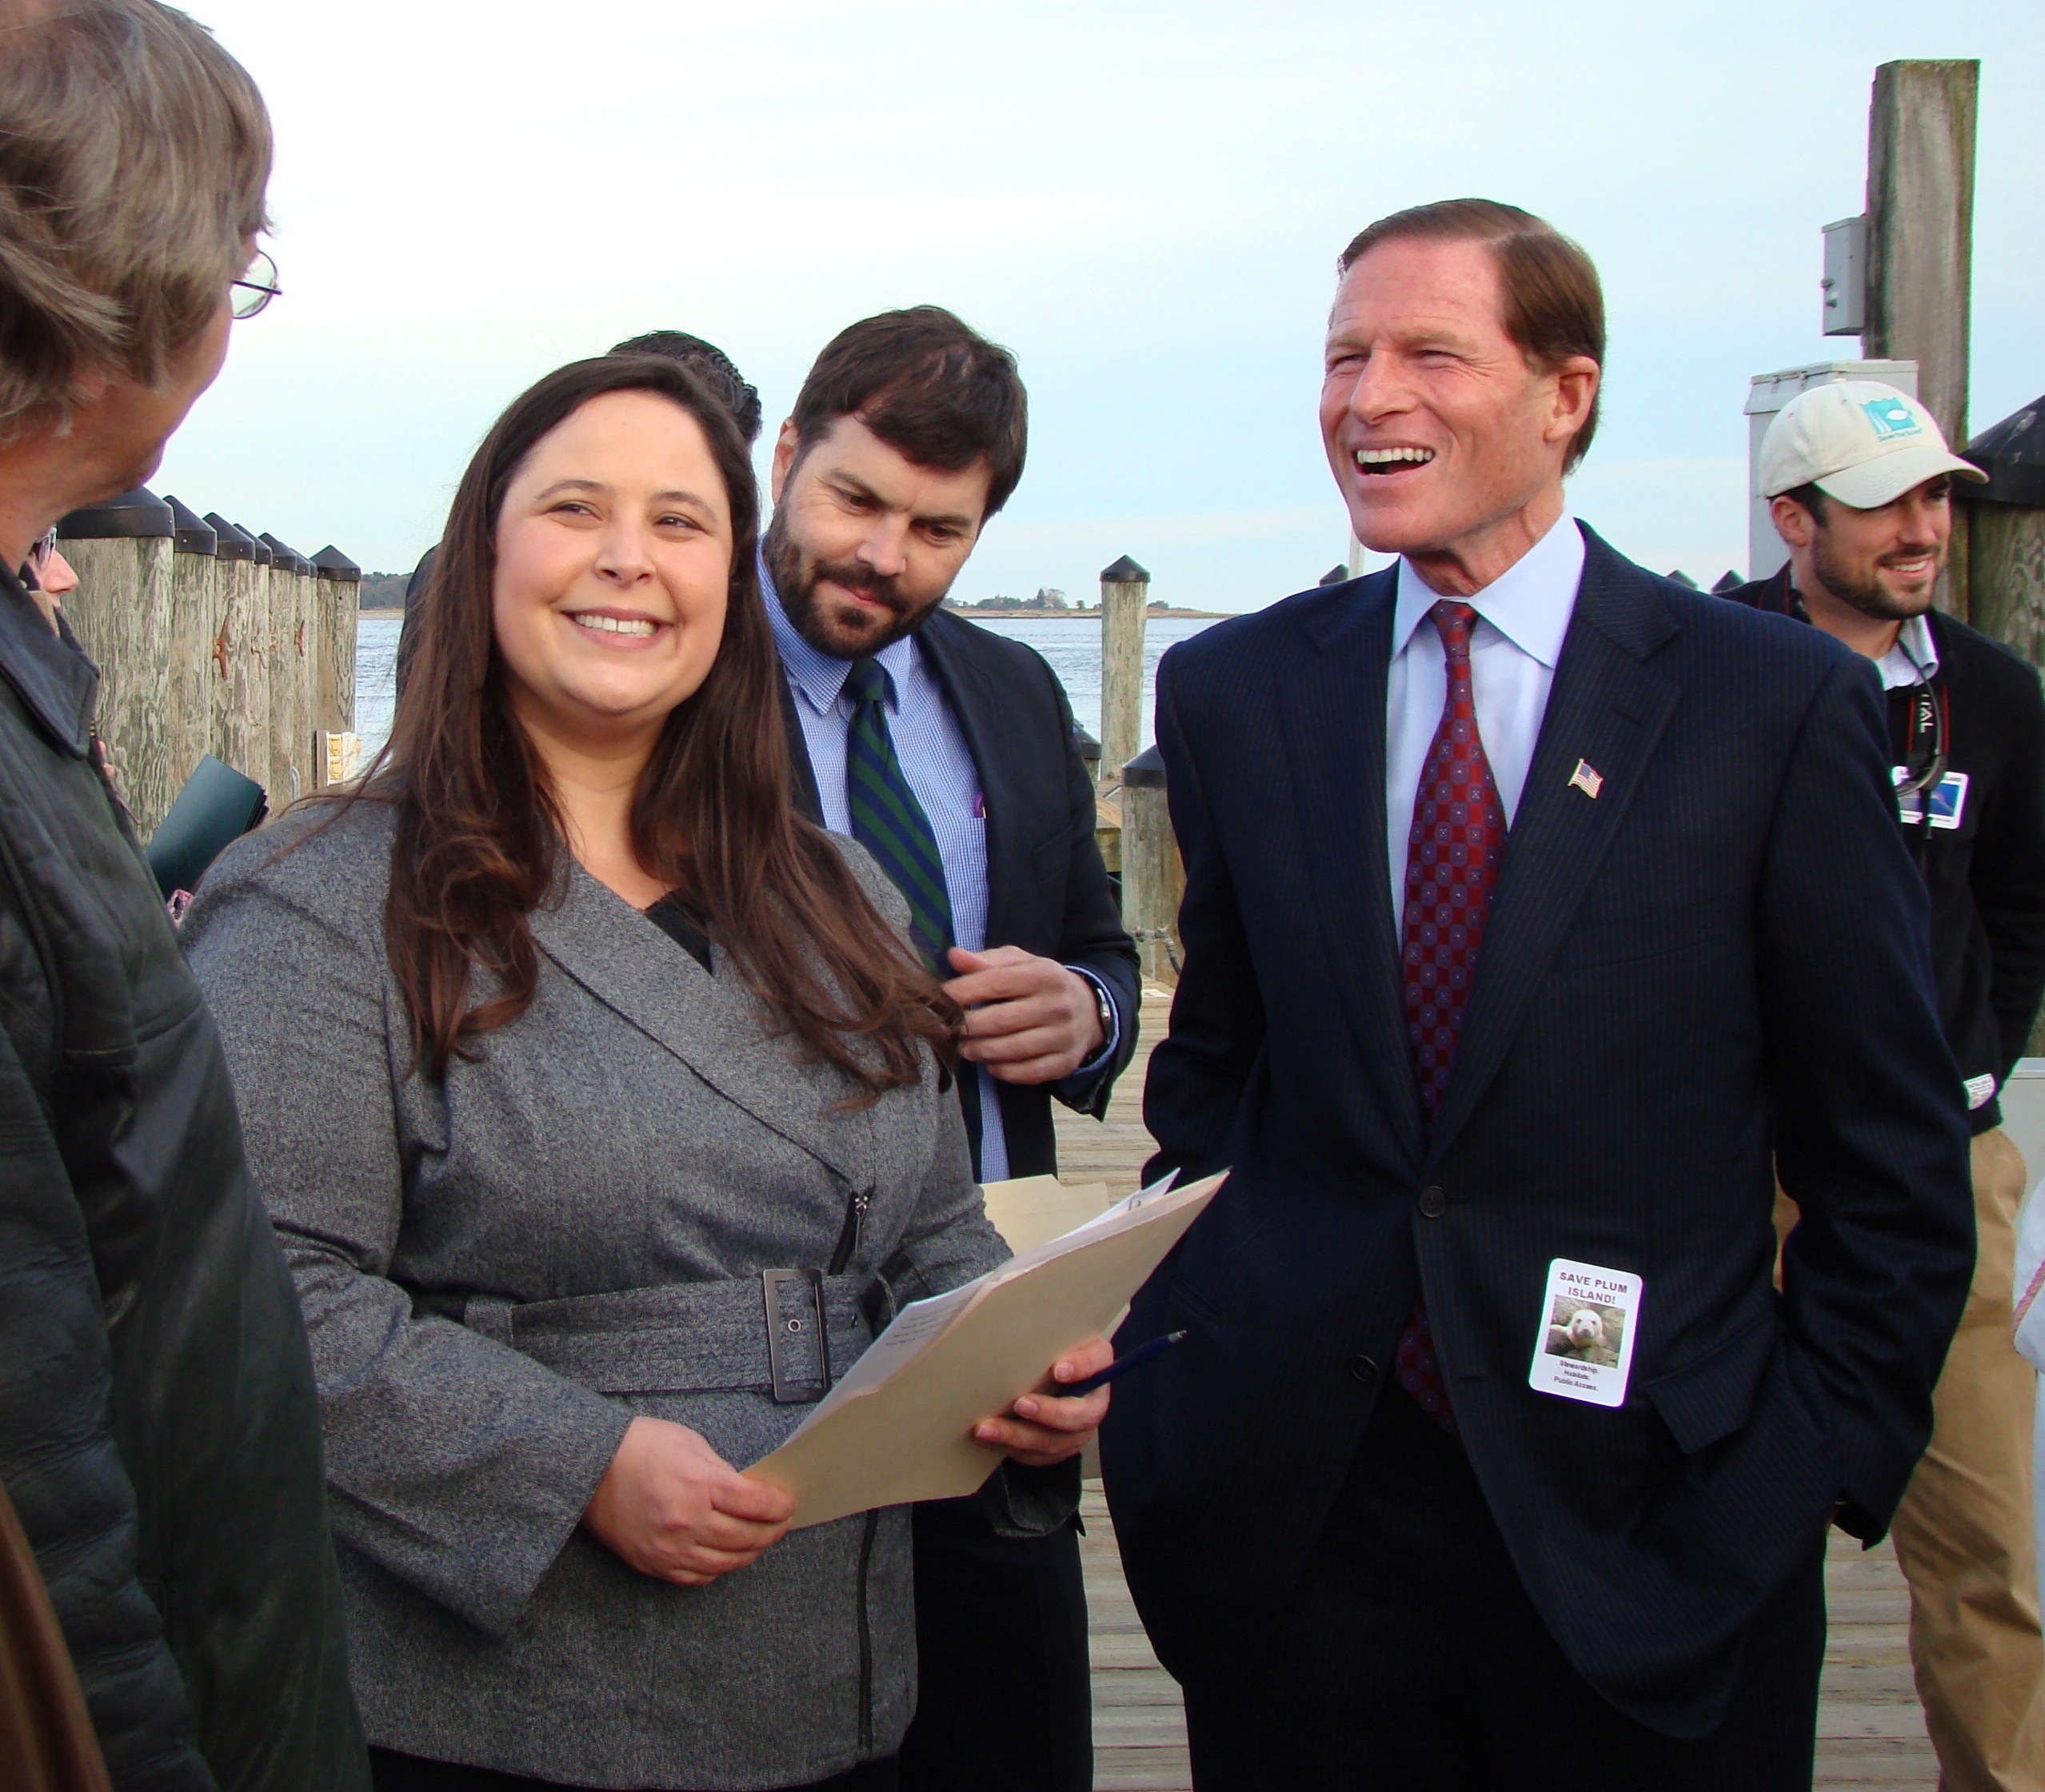 Senator Blumenthal joins Save the Sound's Leah Lopez Schmalz and other advocates at a press conference about the importance of preserving Plum Island. The press conference preceded public hearings in Old Saybrook, CT and Greenport, Long Island, at which many members of the public, the Connecticut and New York environmental communities, and elected officials spoke out to ask the federal government to conserve the island.